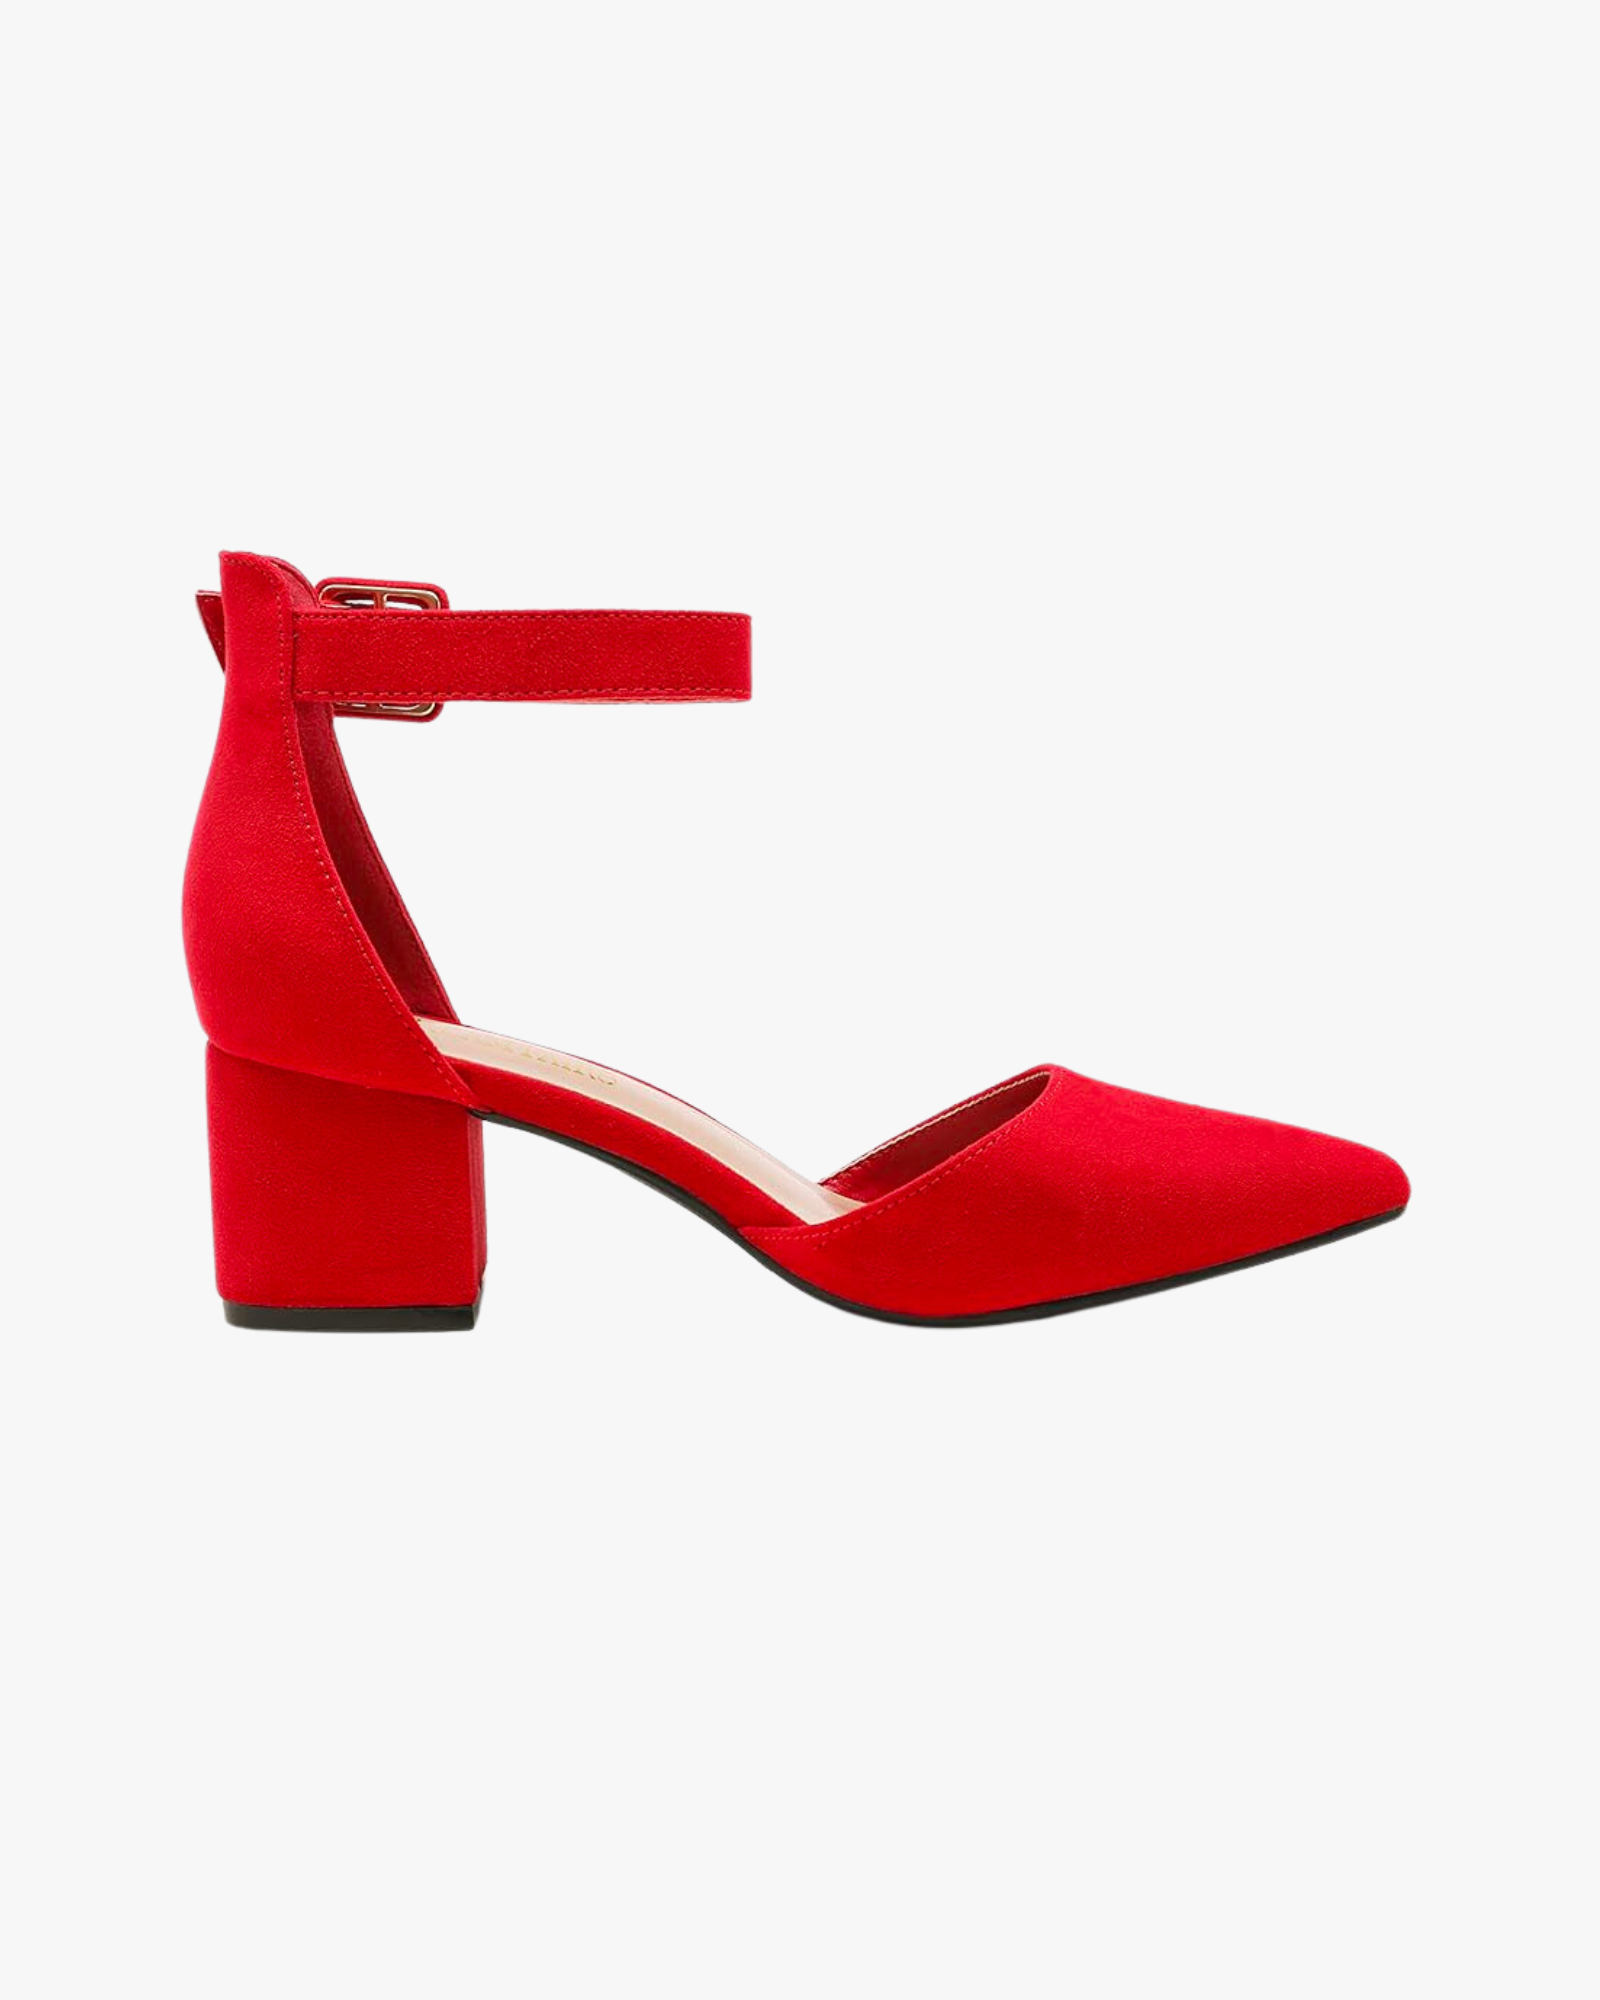 10 Comfortable Designer Heels to Have In Your Closet – Inside The Closet